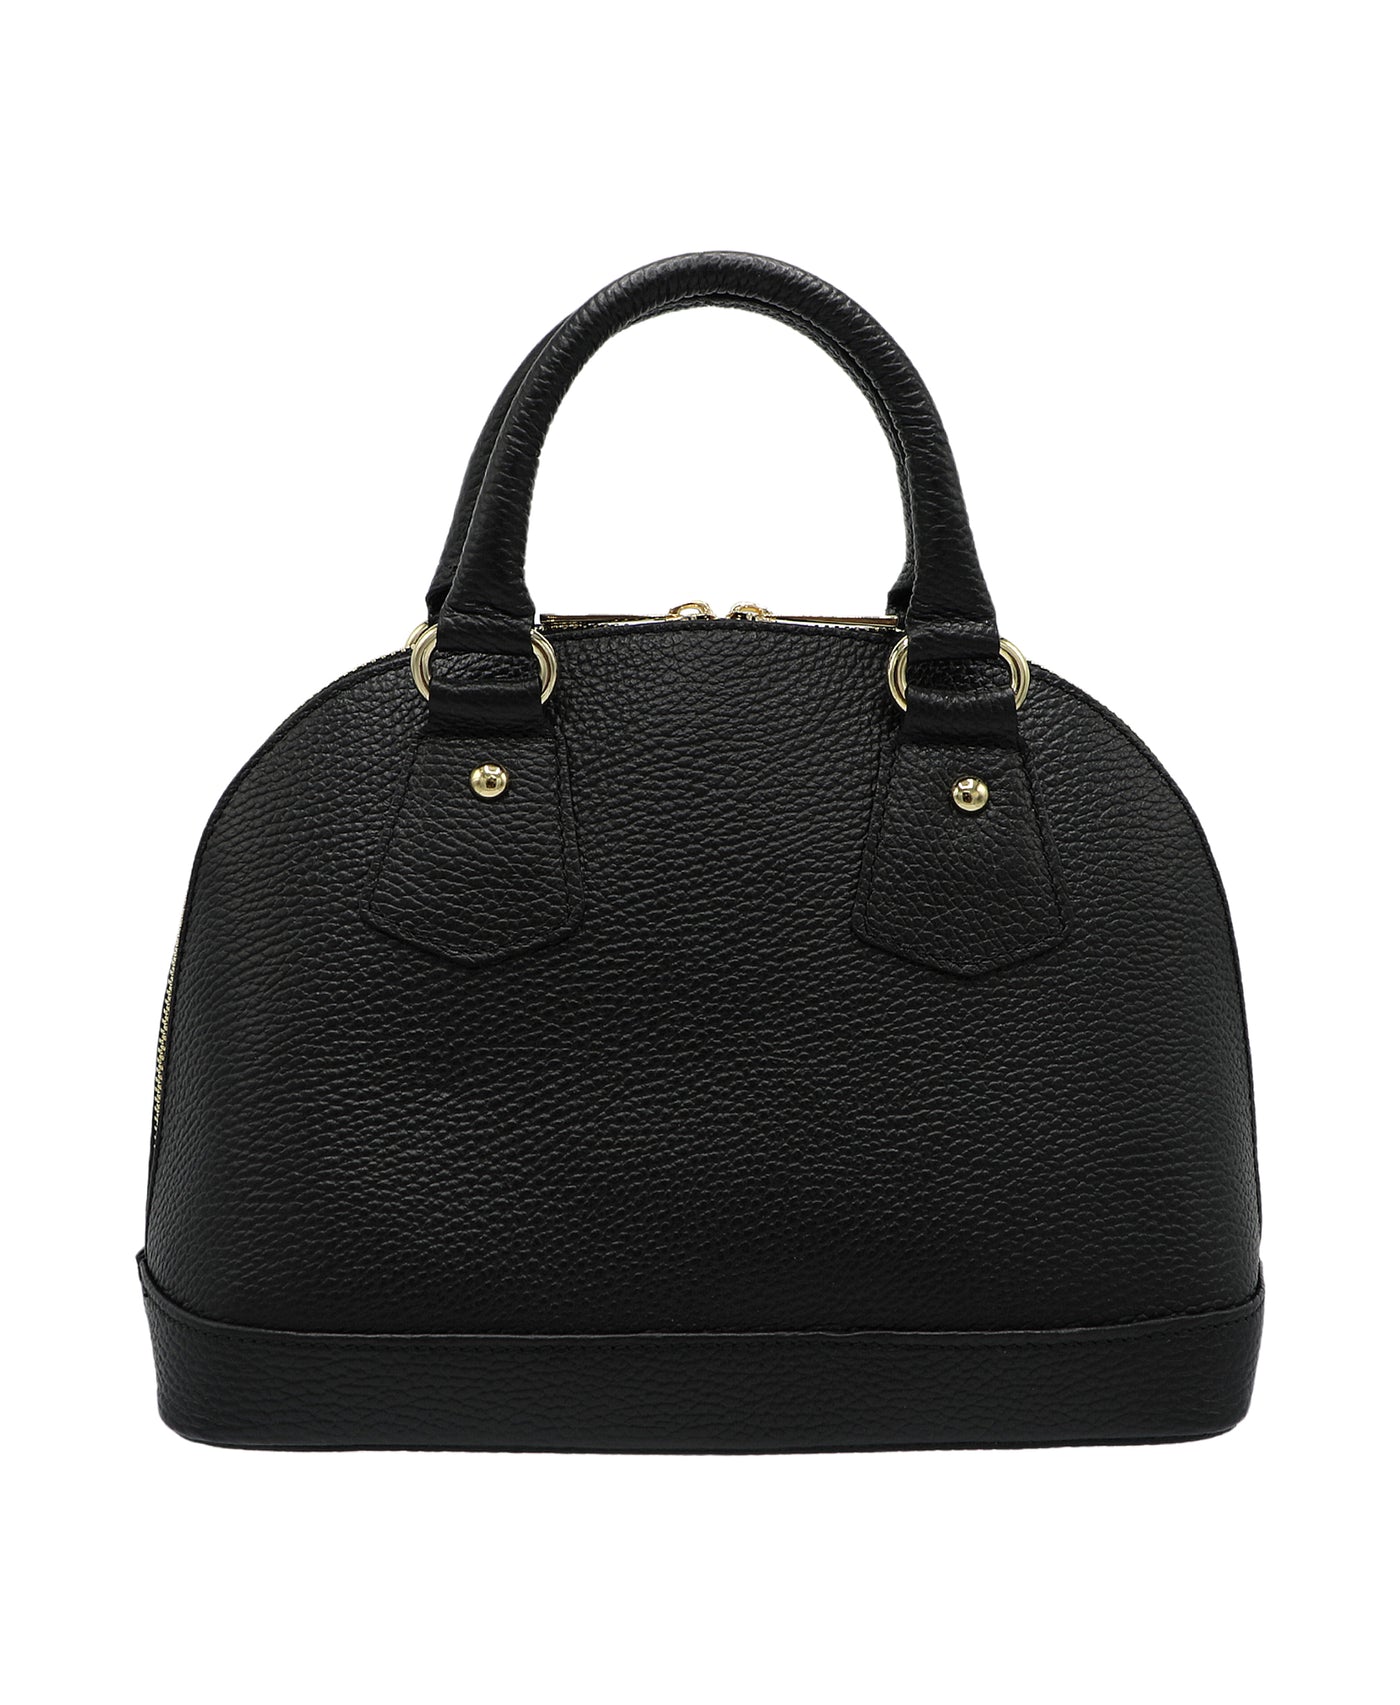 Leather Bowler Bag w/ Double Handles image 1